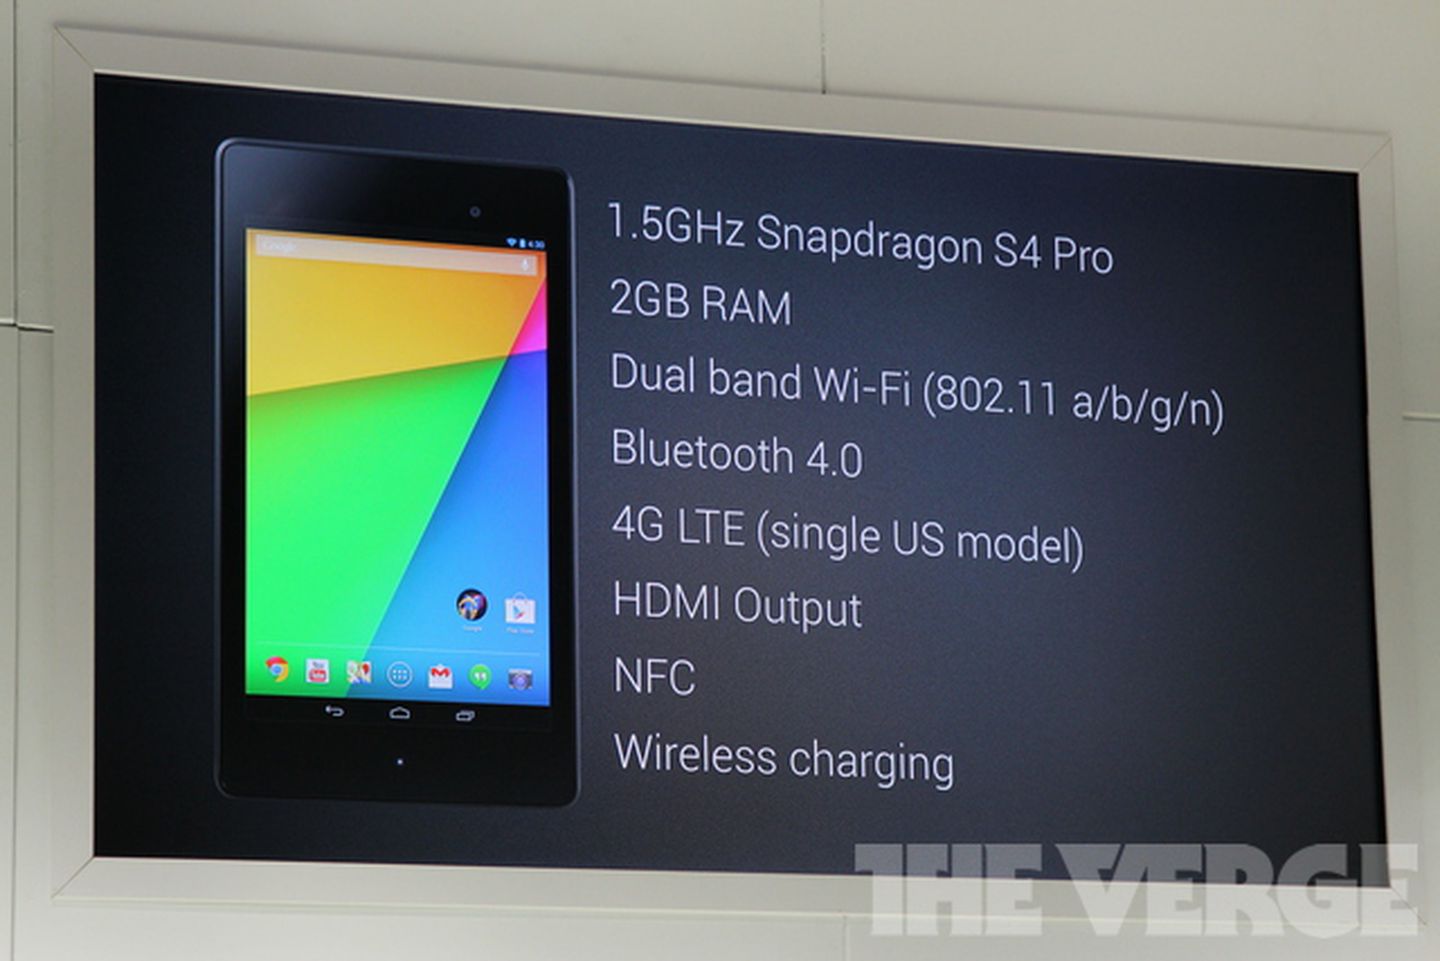 Google's new Nexus 7 tablet will be available on July 30th for 229